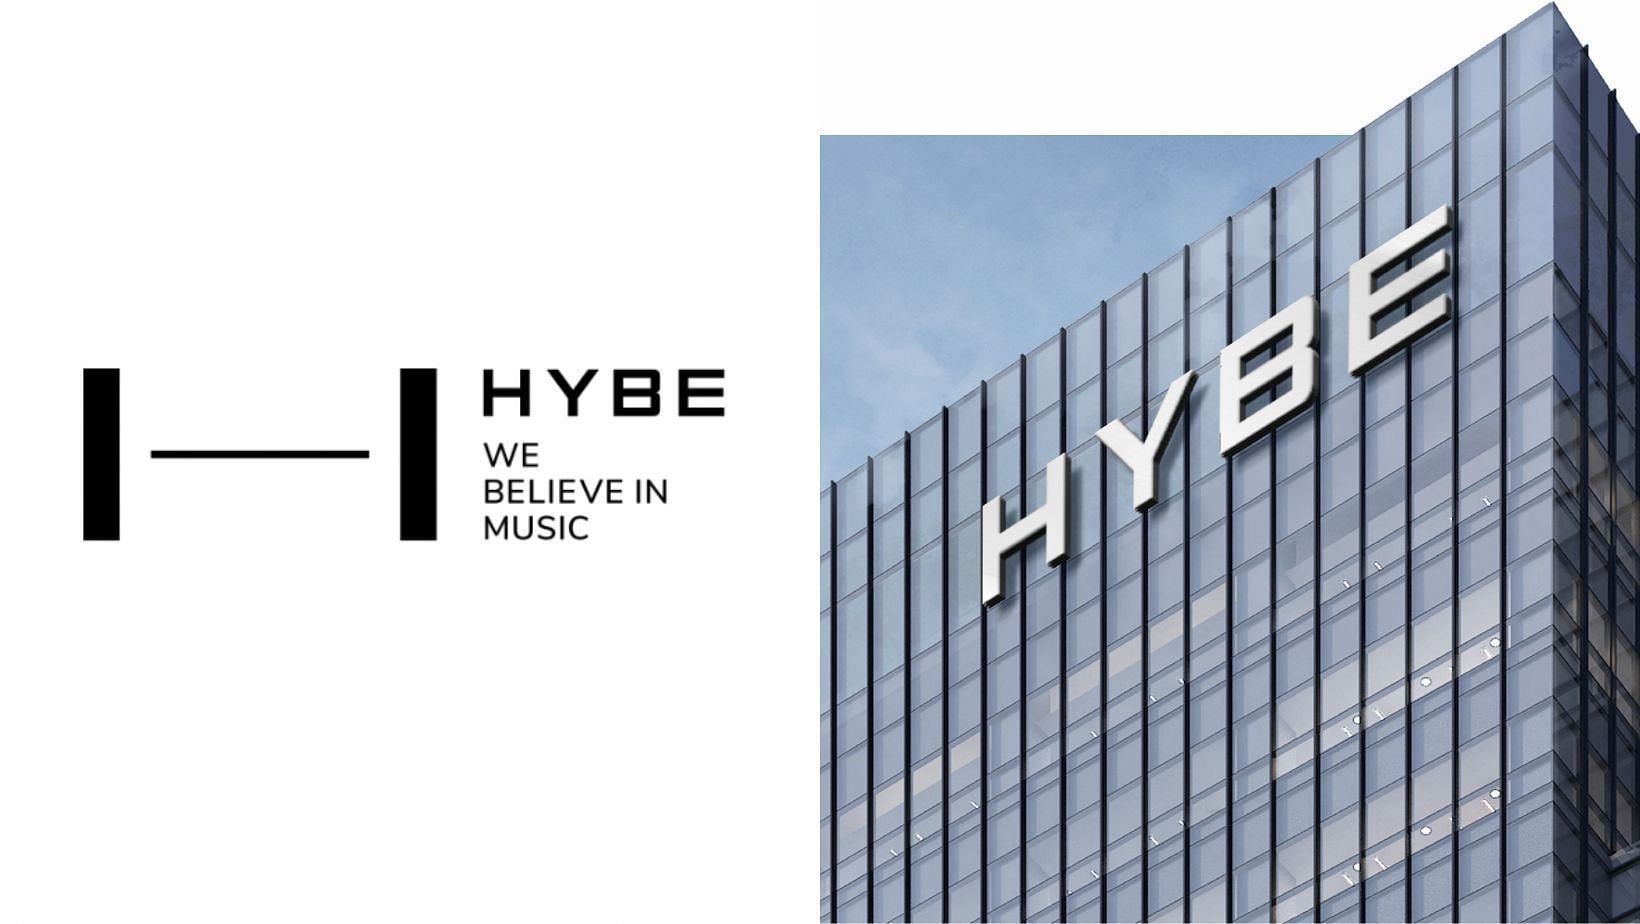 Fair Trade Commission launches official investigation against HYBE Chairman Bang Si-Hyuk for allegedly counterfeiting documents. (Images via HYBE website)